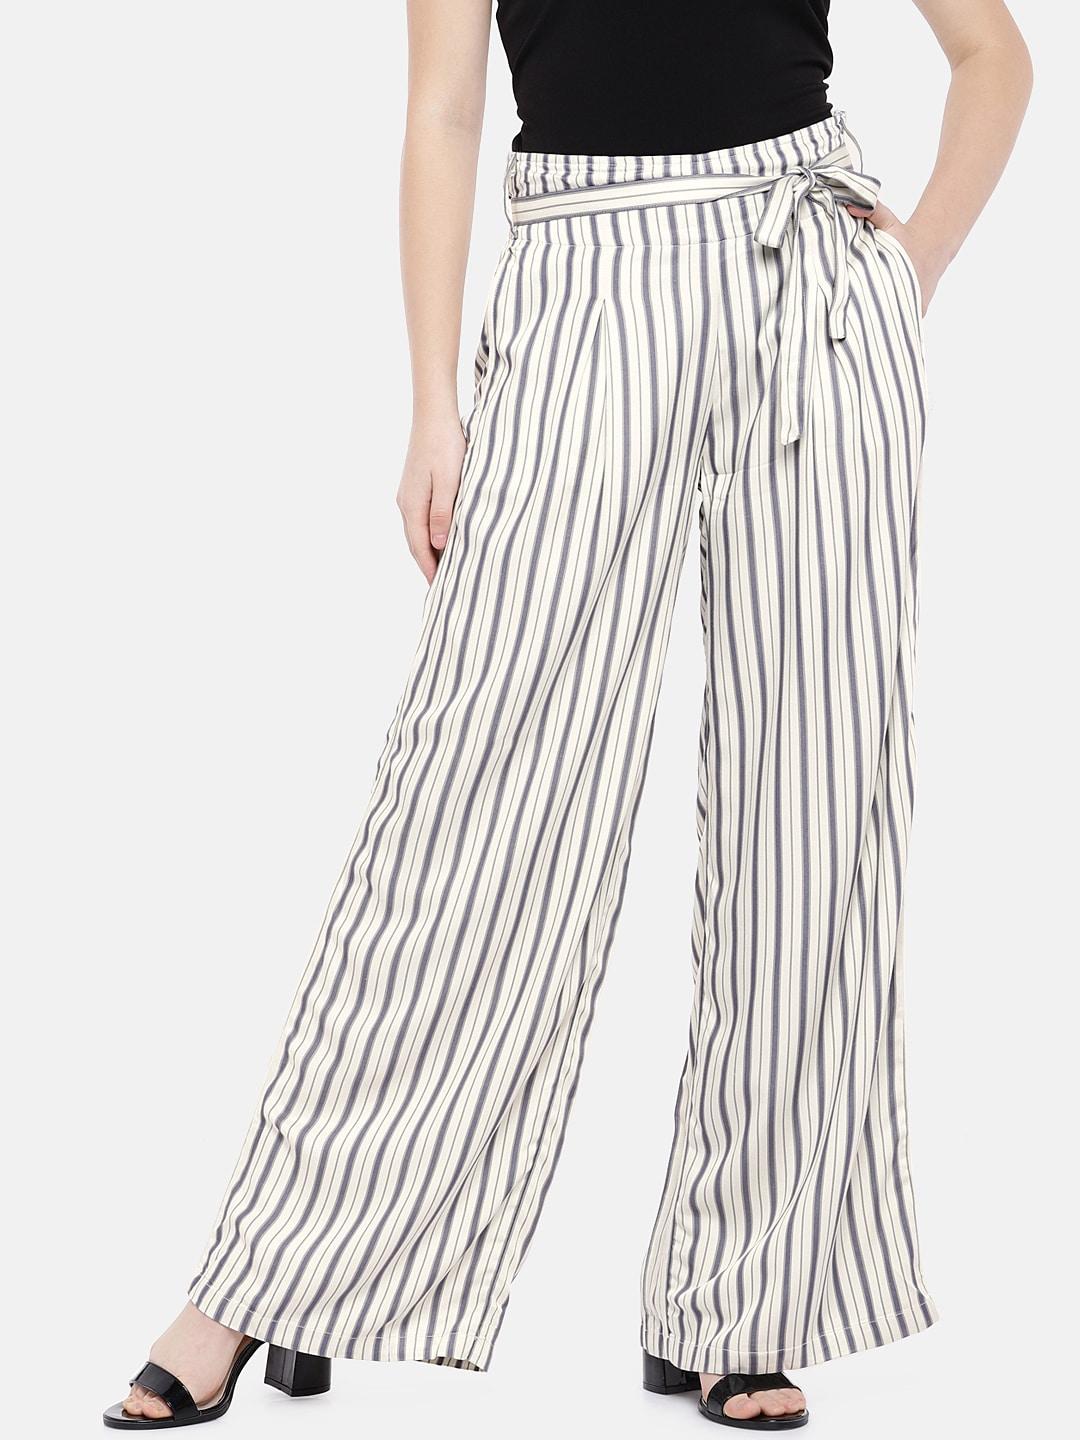 u.s. polo assn. women women off-white & charcoal flared striped parallel trousers